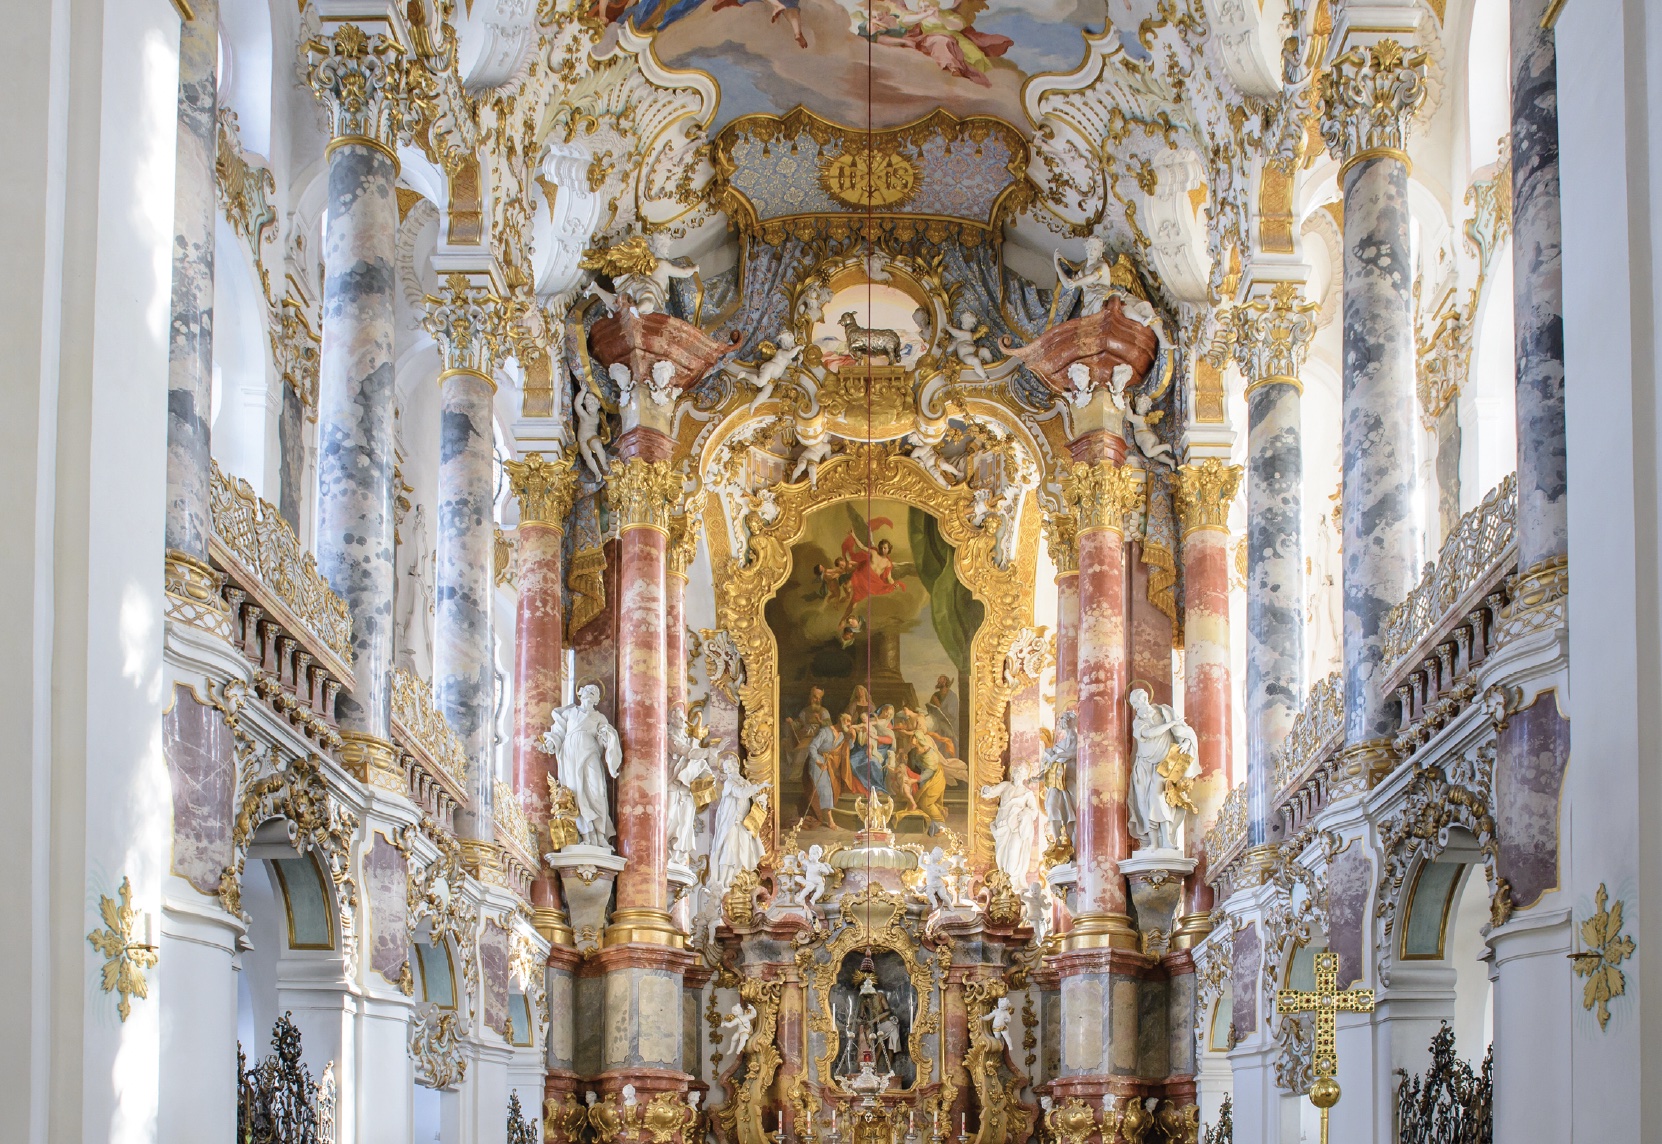 Wieskirche church in Bavaria, an oval rococo building, designed in the late 1740s by brothers J. B. and Dominikus Zimmermann